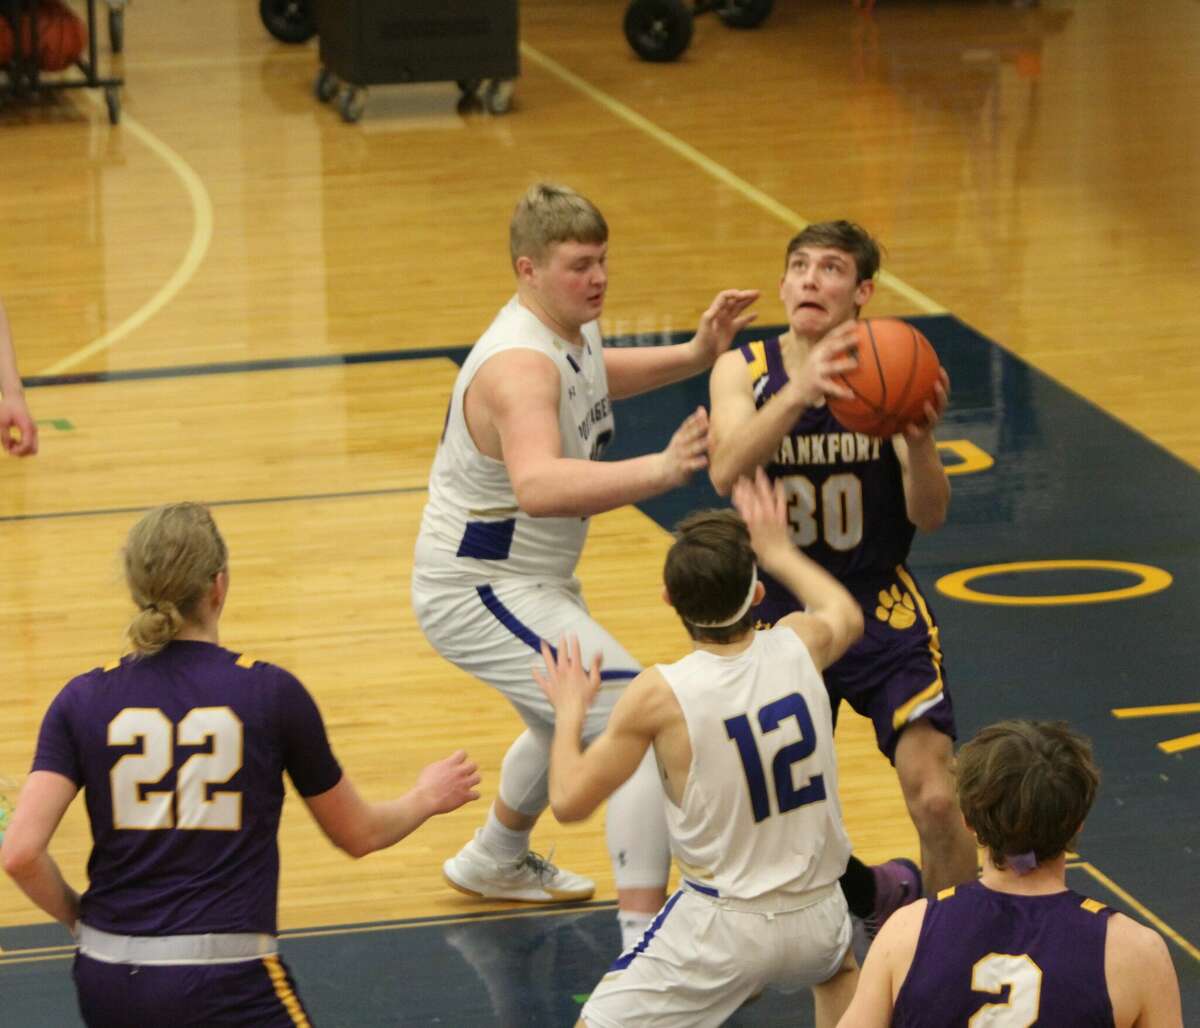 Frankfort junior Xander Sauer decides to pass instead of shoot the ball against Onekama on Friday, Feb. 25 at Onekama High School.